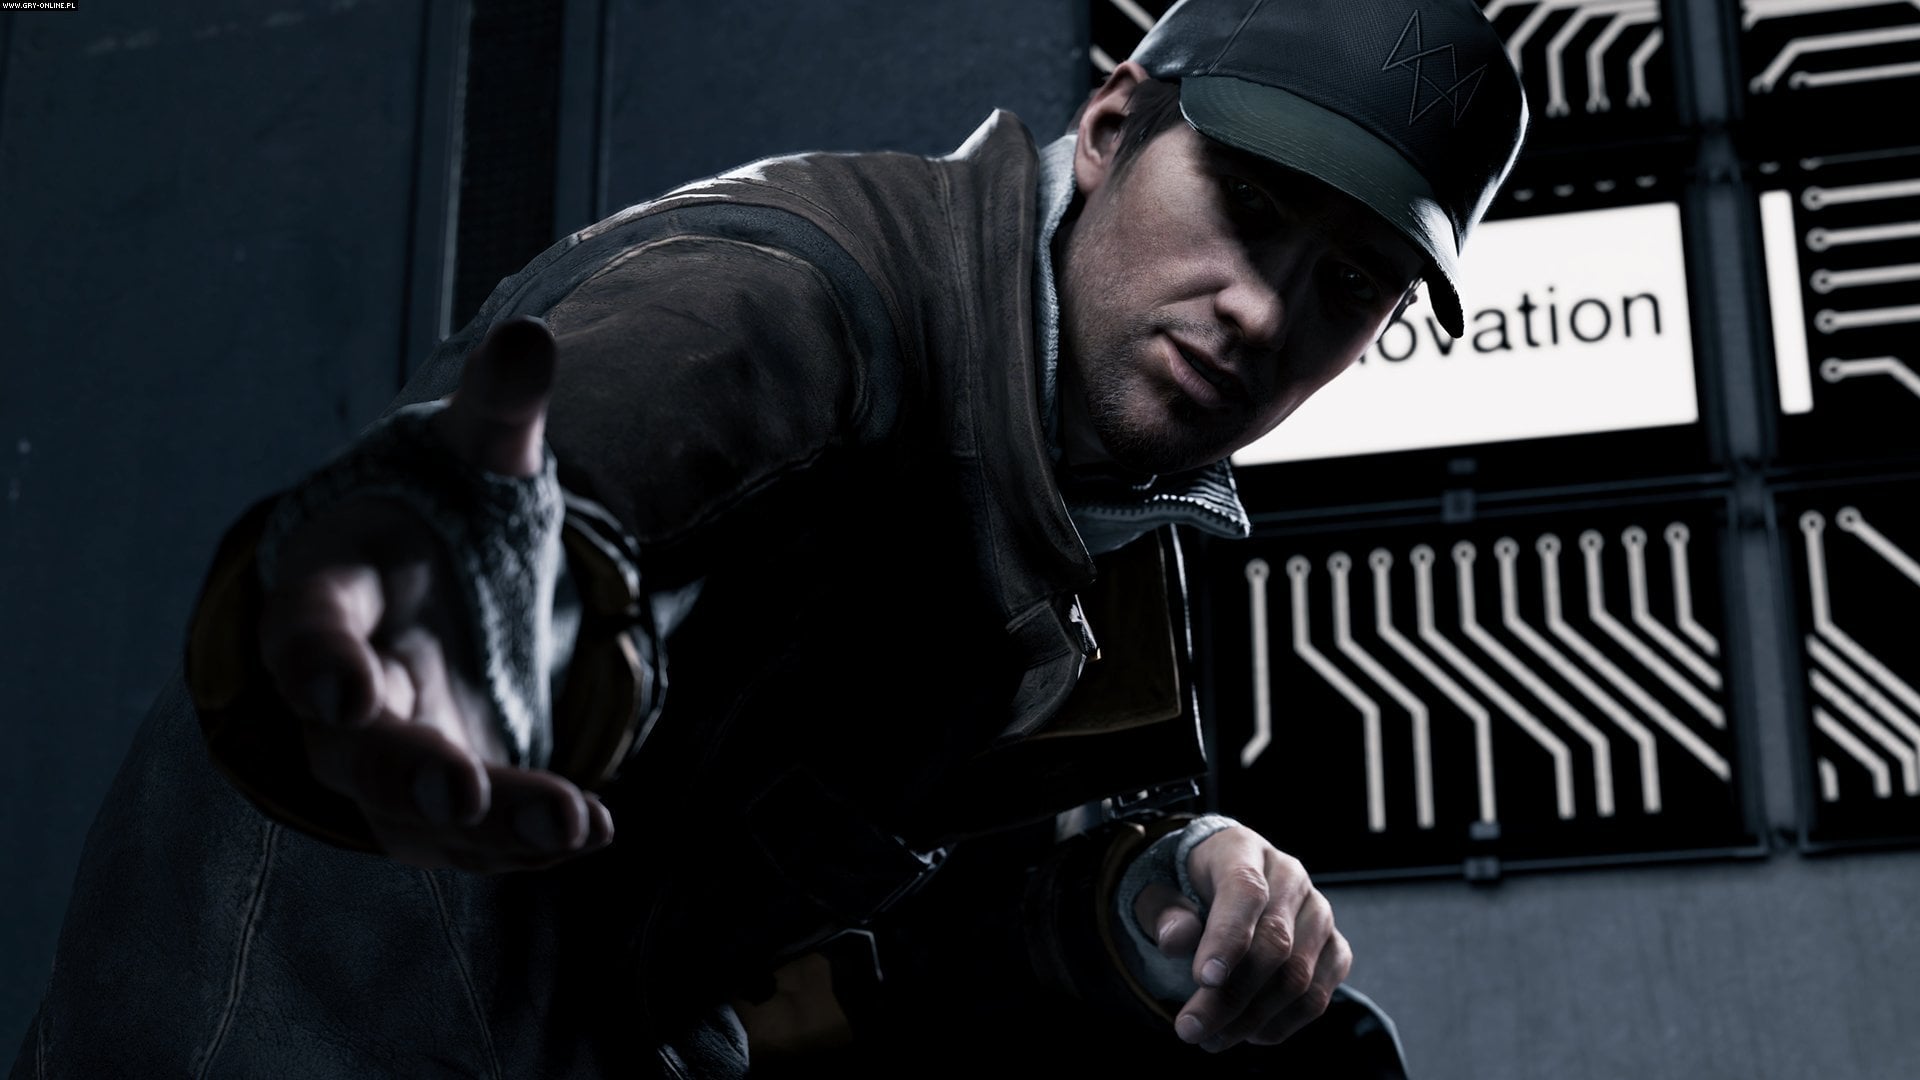 download watch dogs pc free